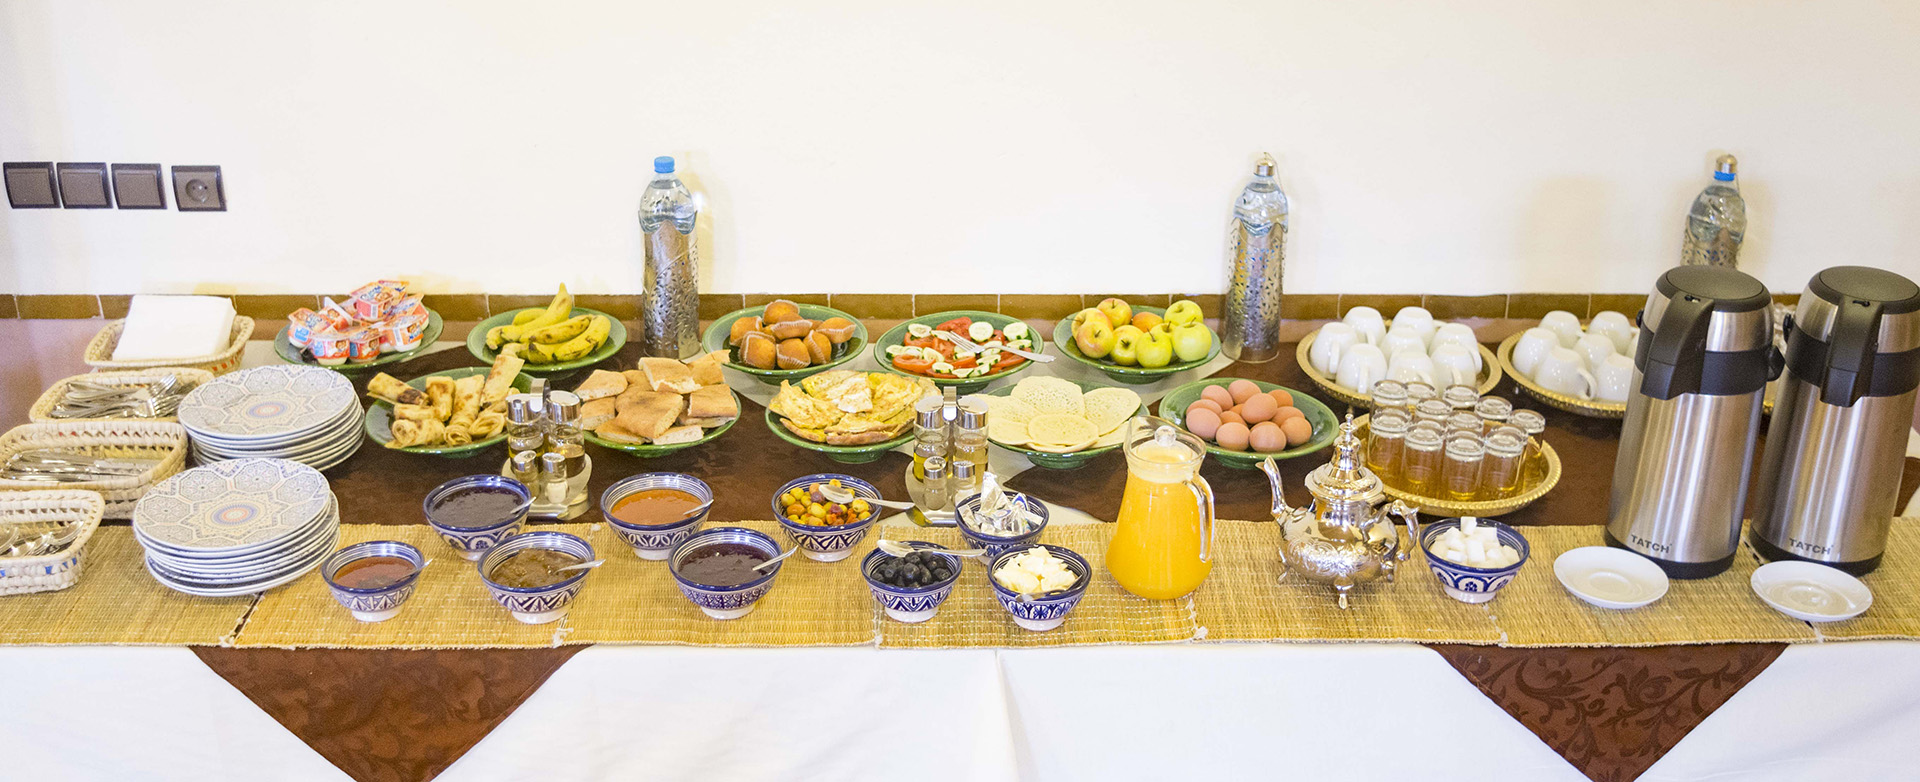 About the breakfast at Riad Dar Hassan